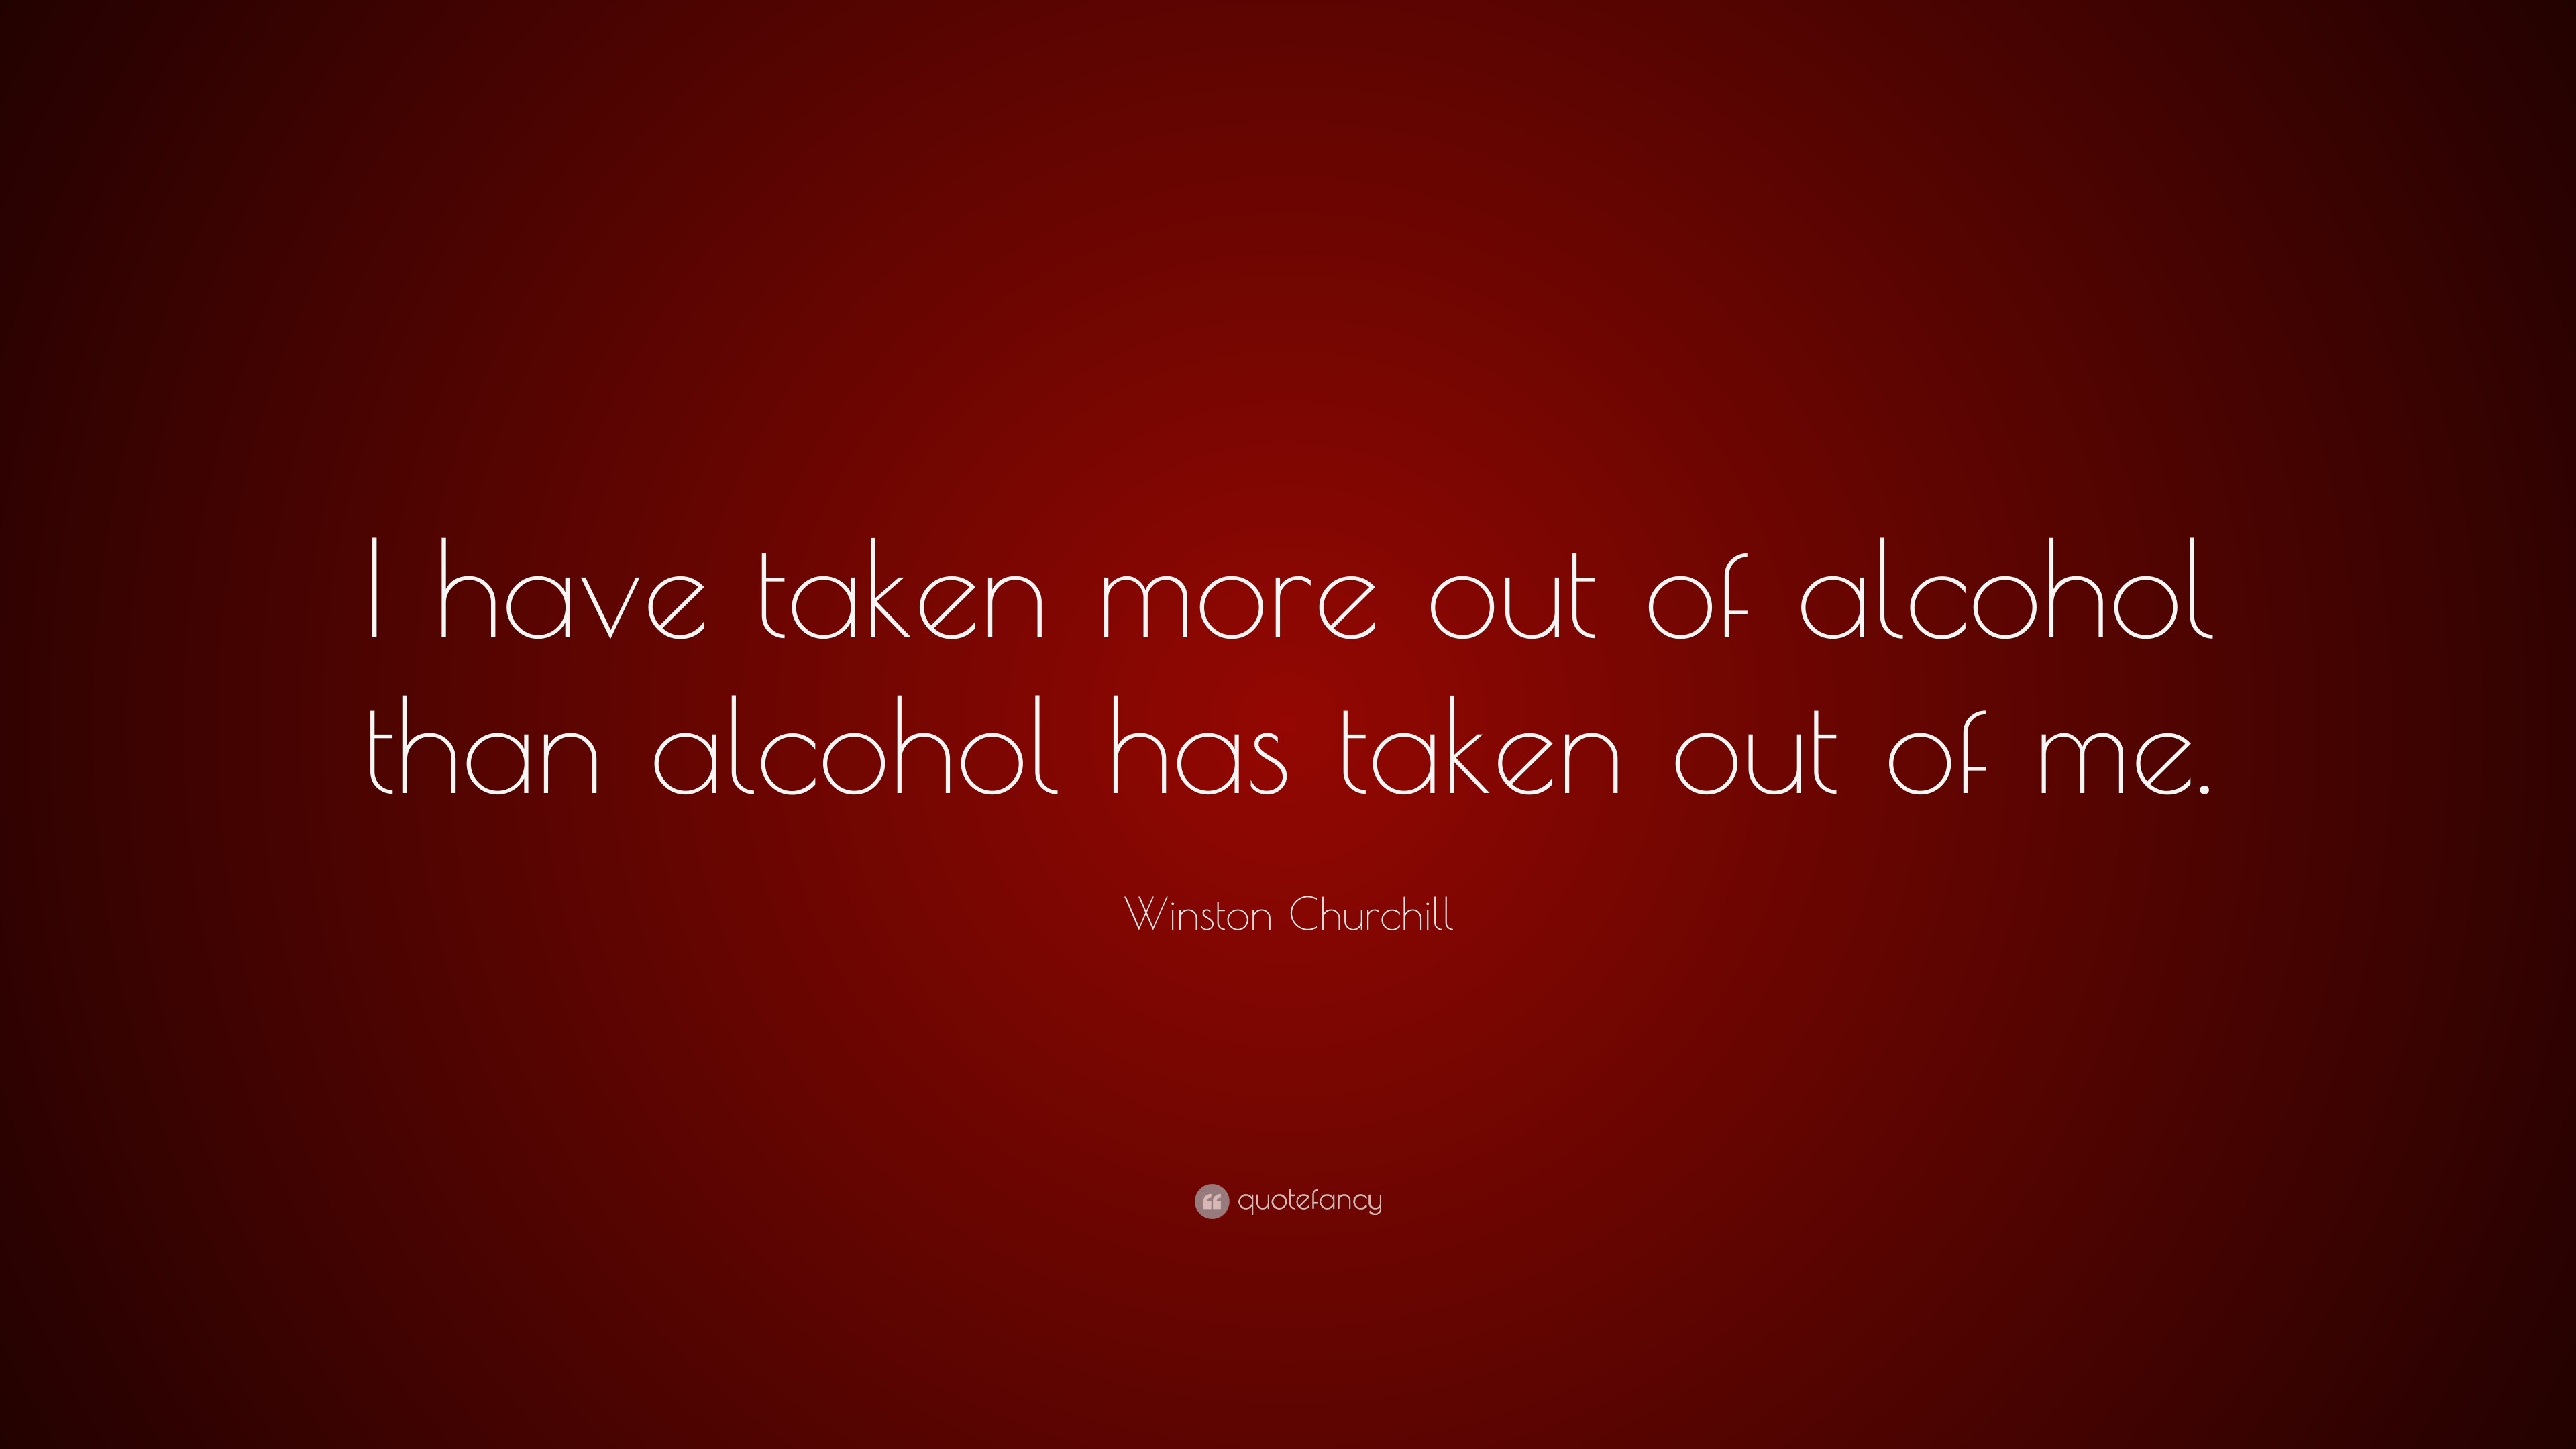 Winston Churchill Quote: “I have taken more out of alcohol than alcohol ...